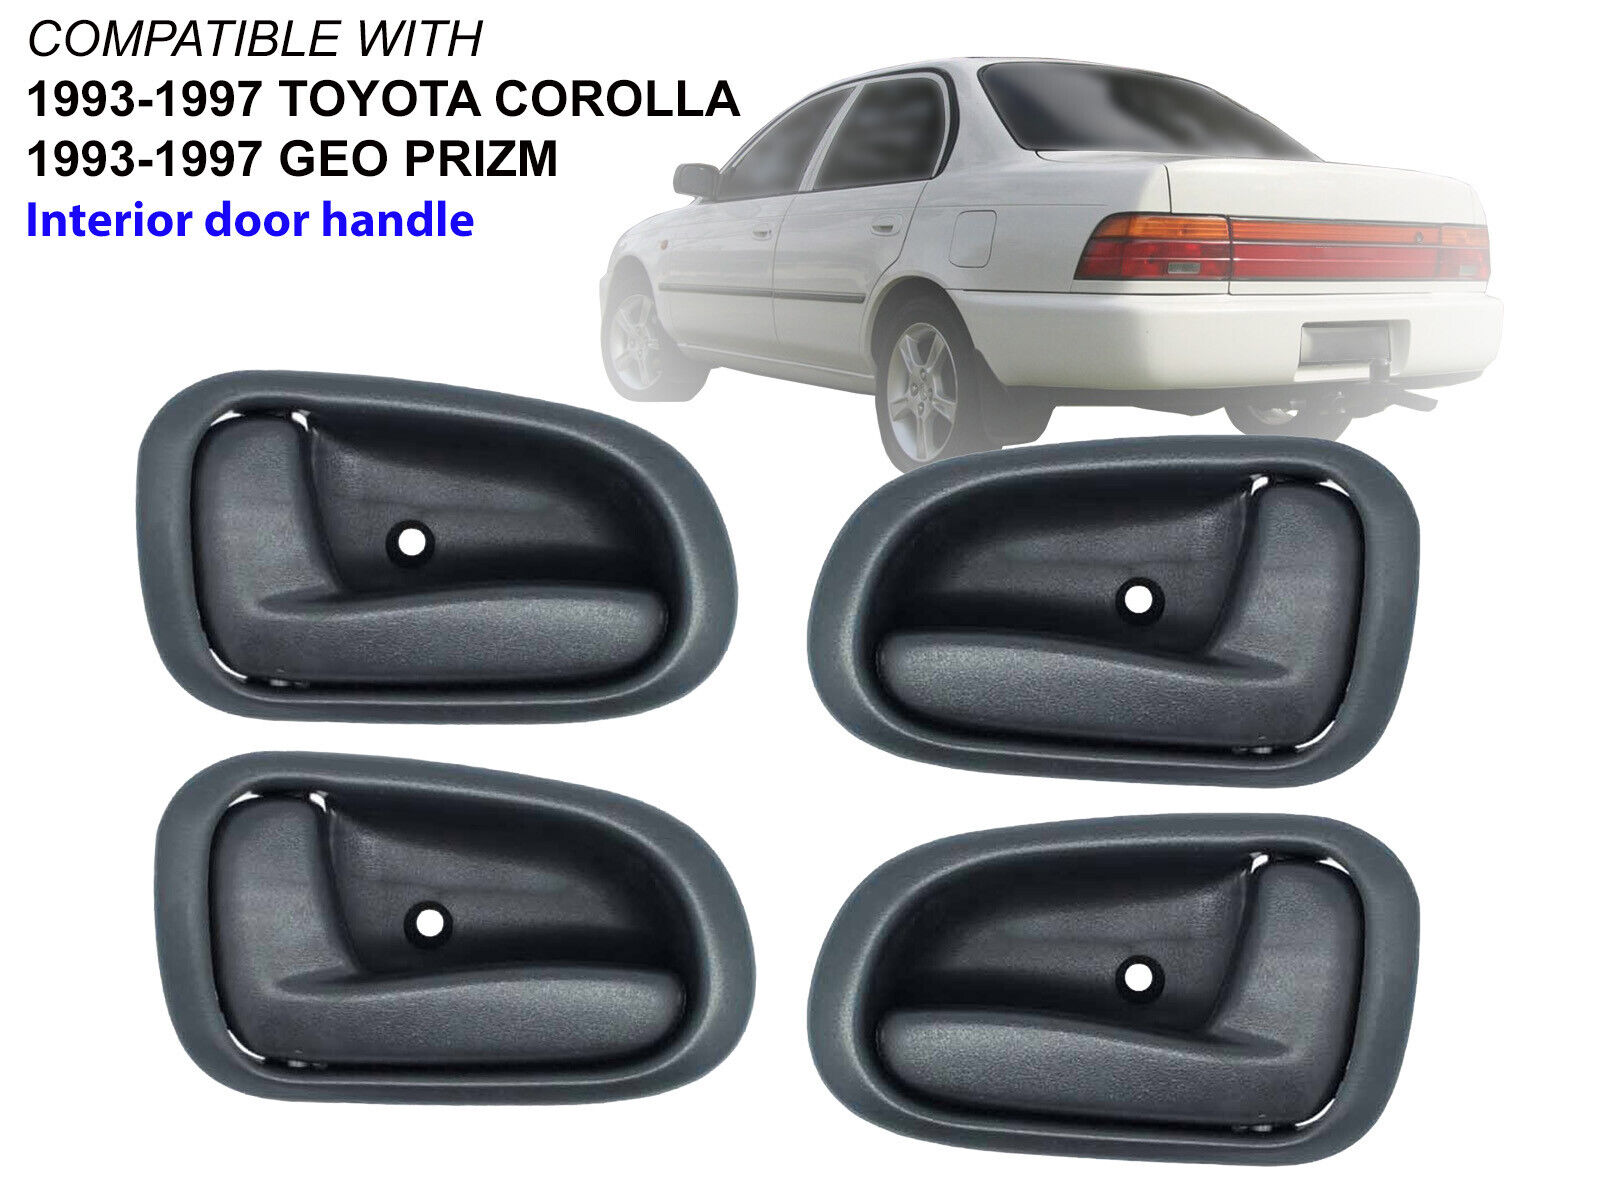 For Gray Inner Door Handle 1993 - 1997 Corolla Prizm Set Front and Rear Side